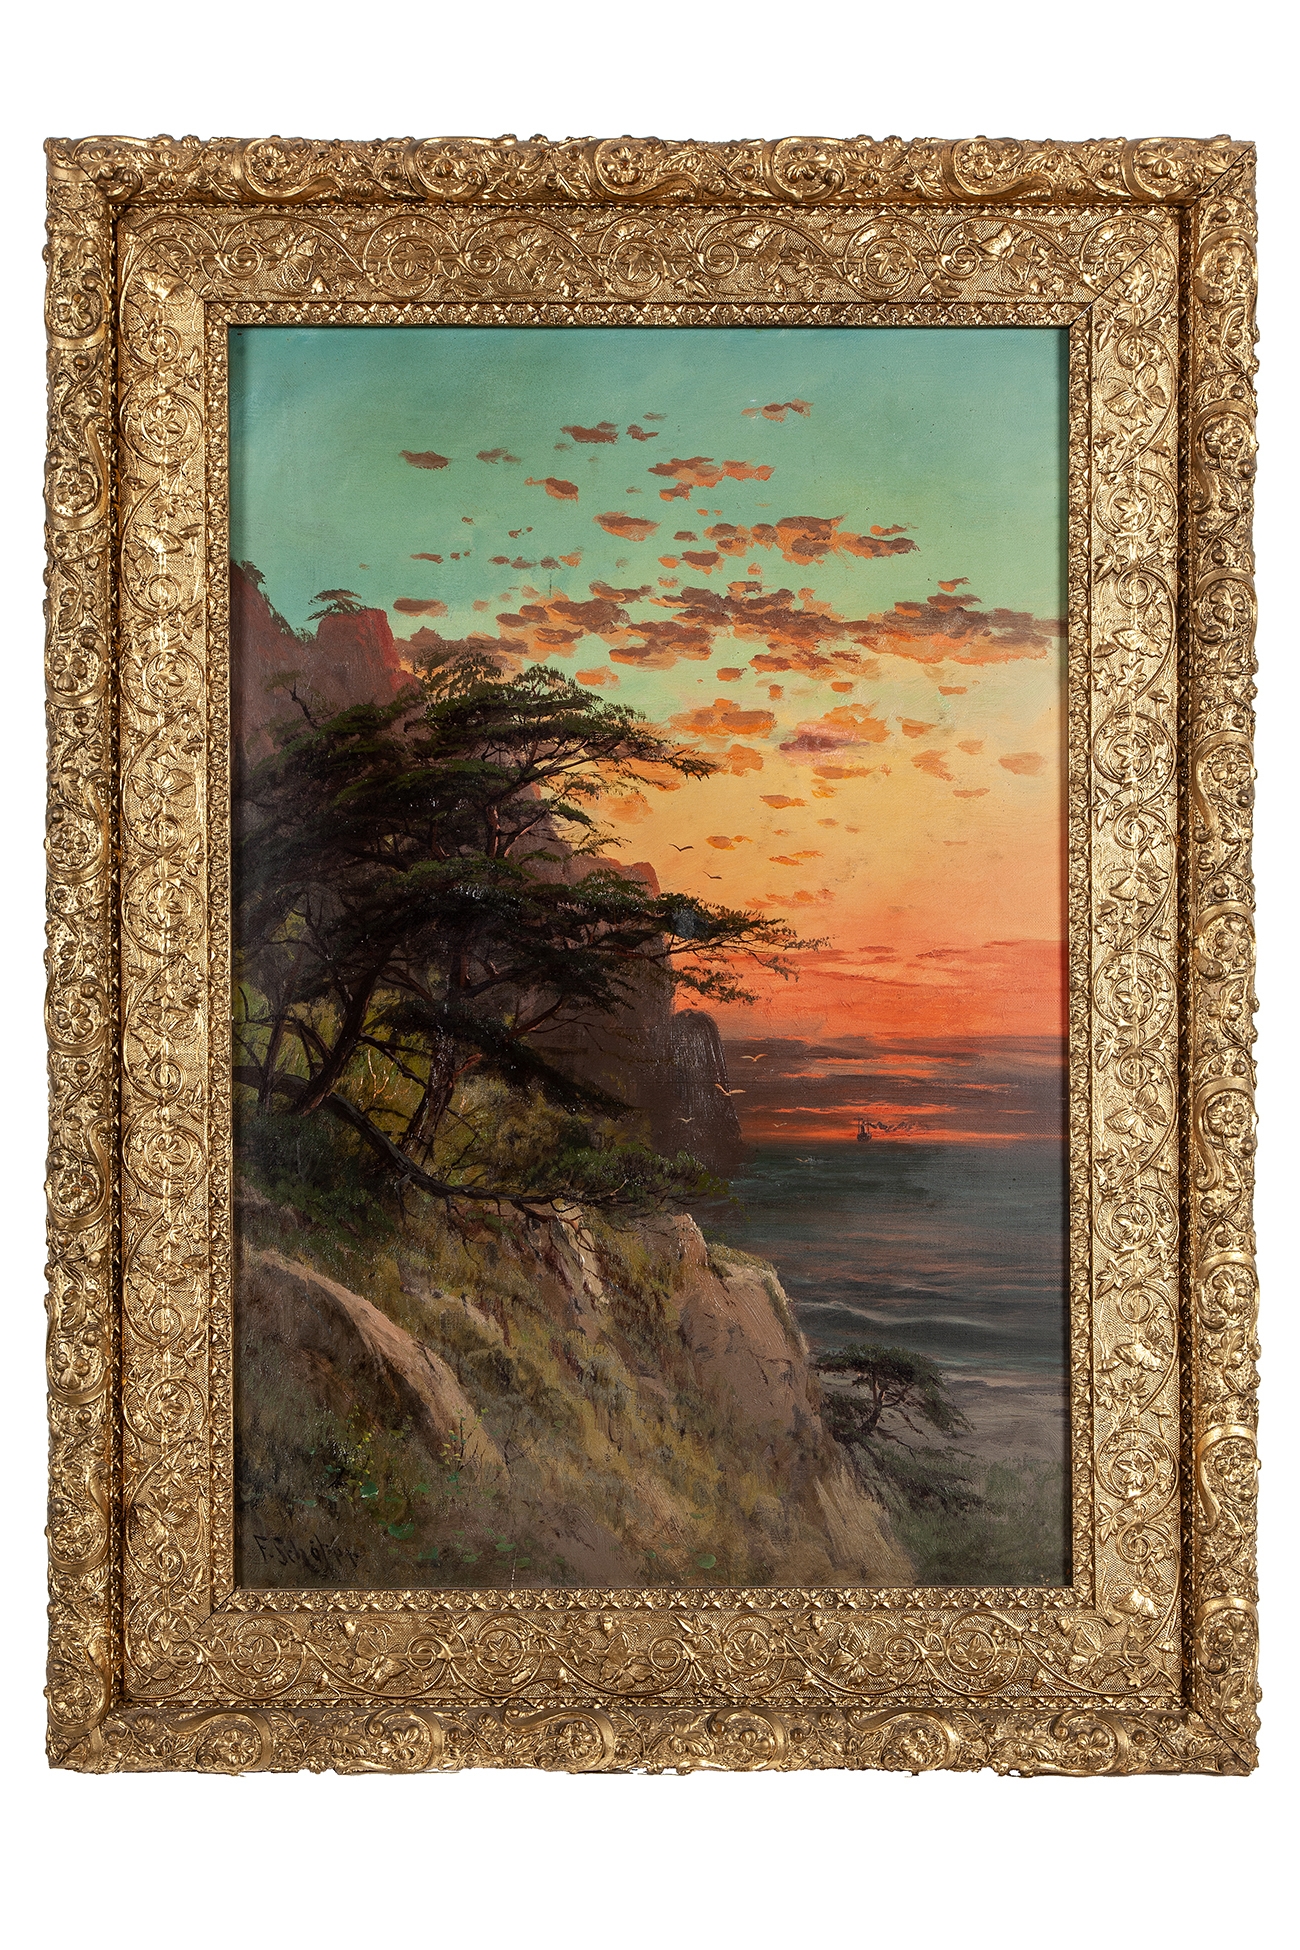 Sunset on Pacific Coast near Monteray Cal. by Frederick Ferdinand Schafer